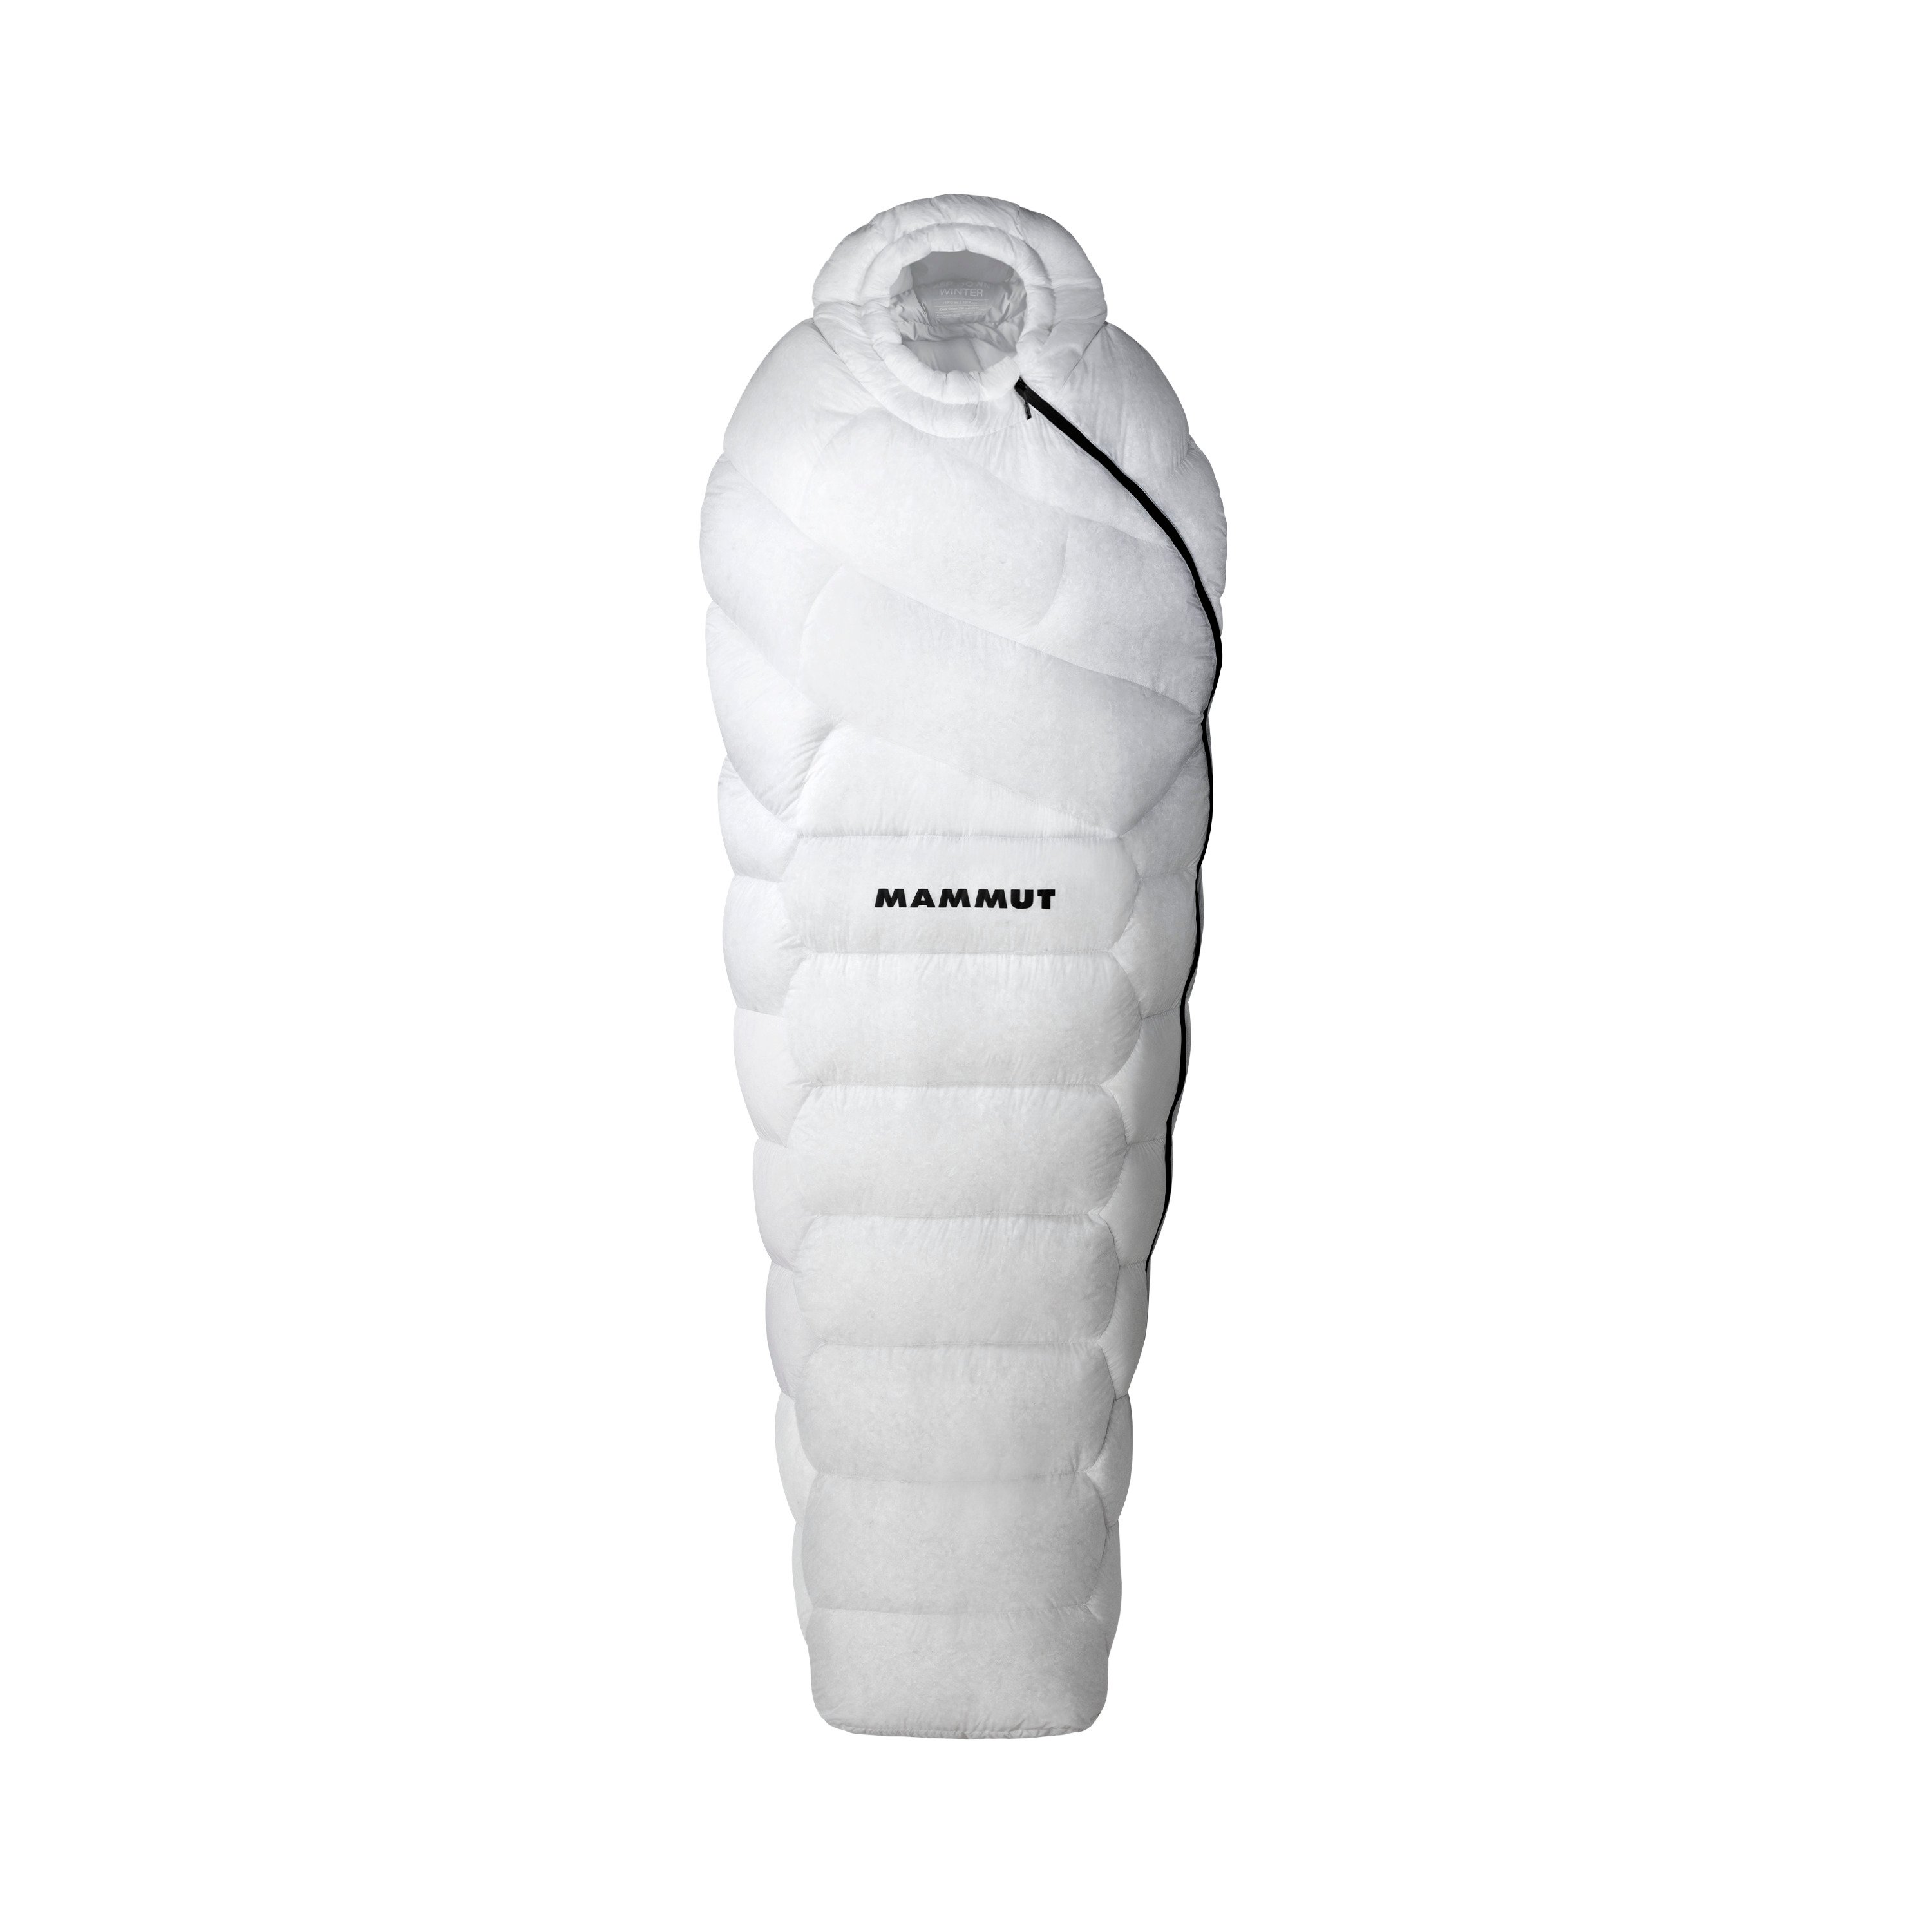 ASP Down Winter - white, 195 cm product image